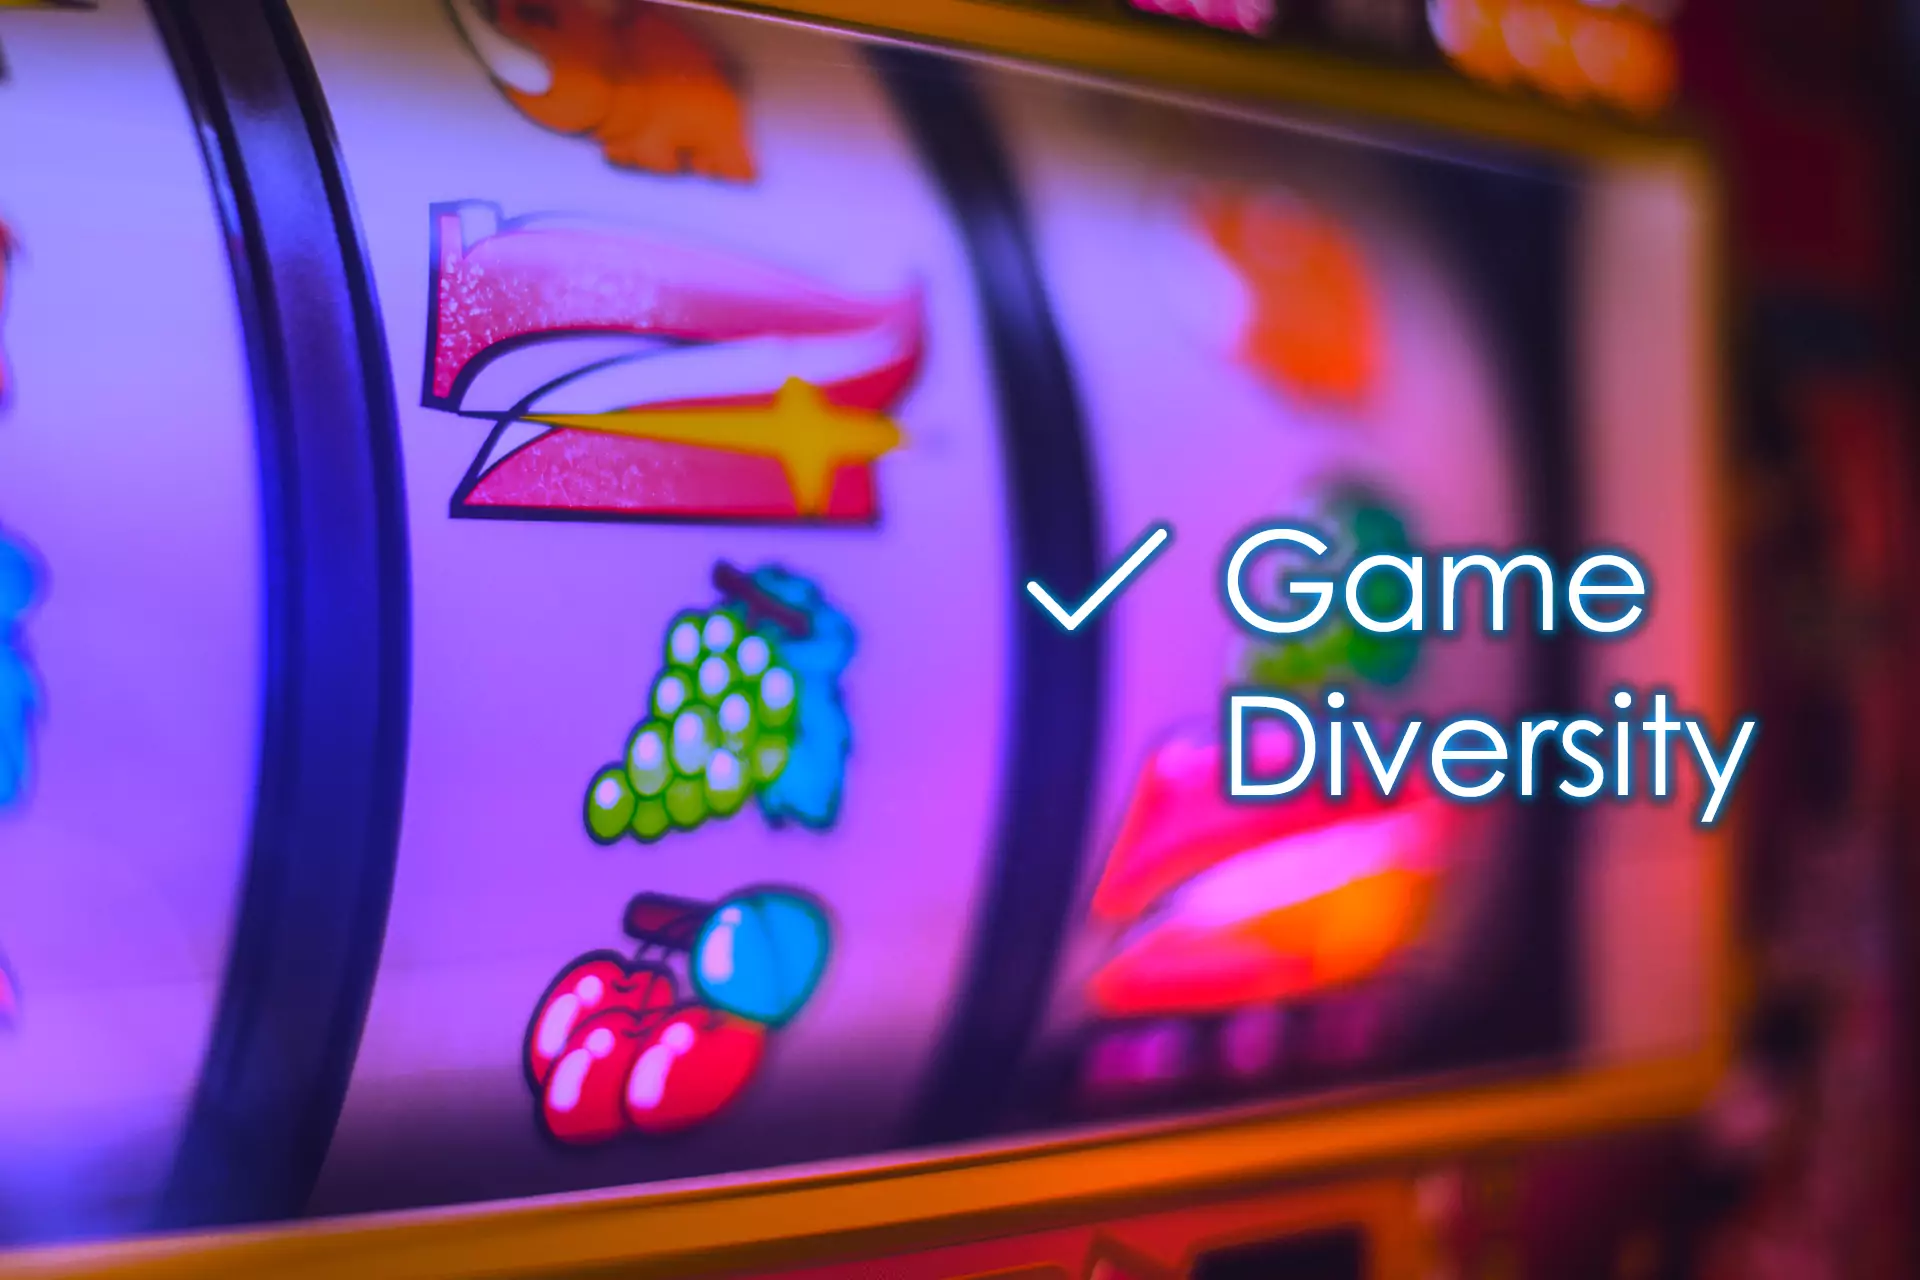 In online casinos, you can play thousands of games of different providers.